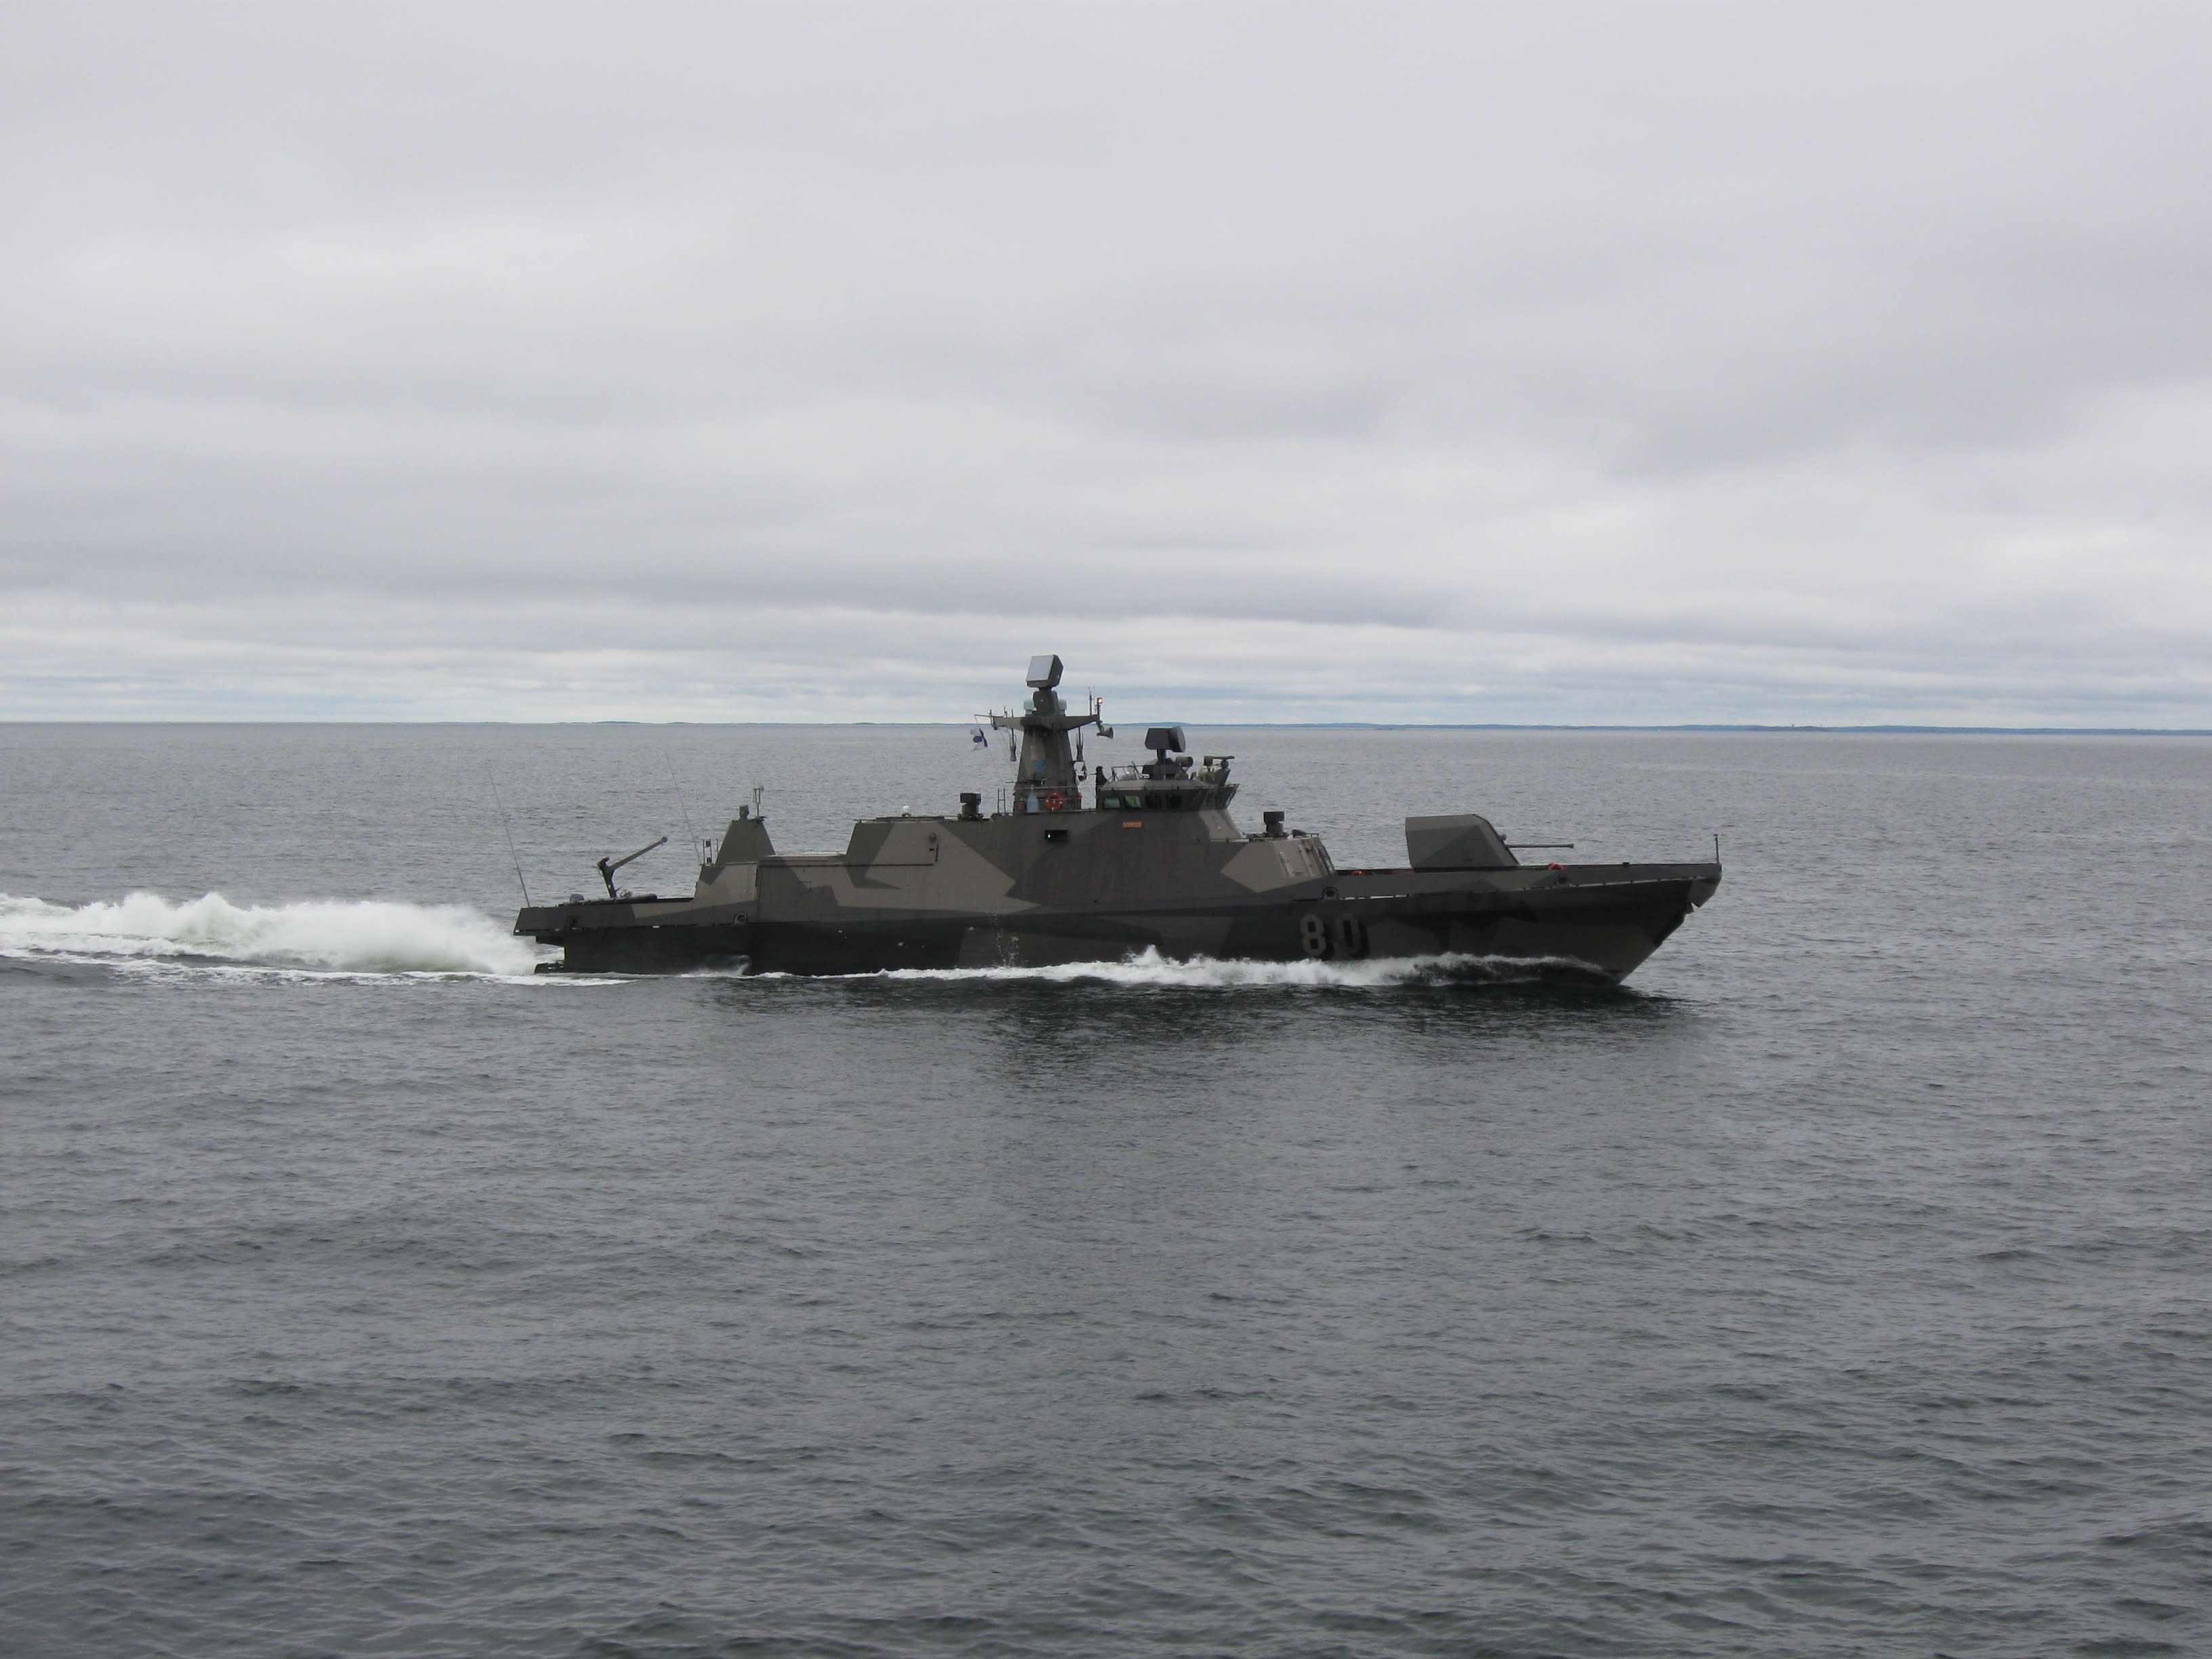 Finland joins the Swedish and French navies in submarine threat exercises